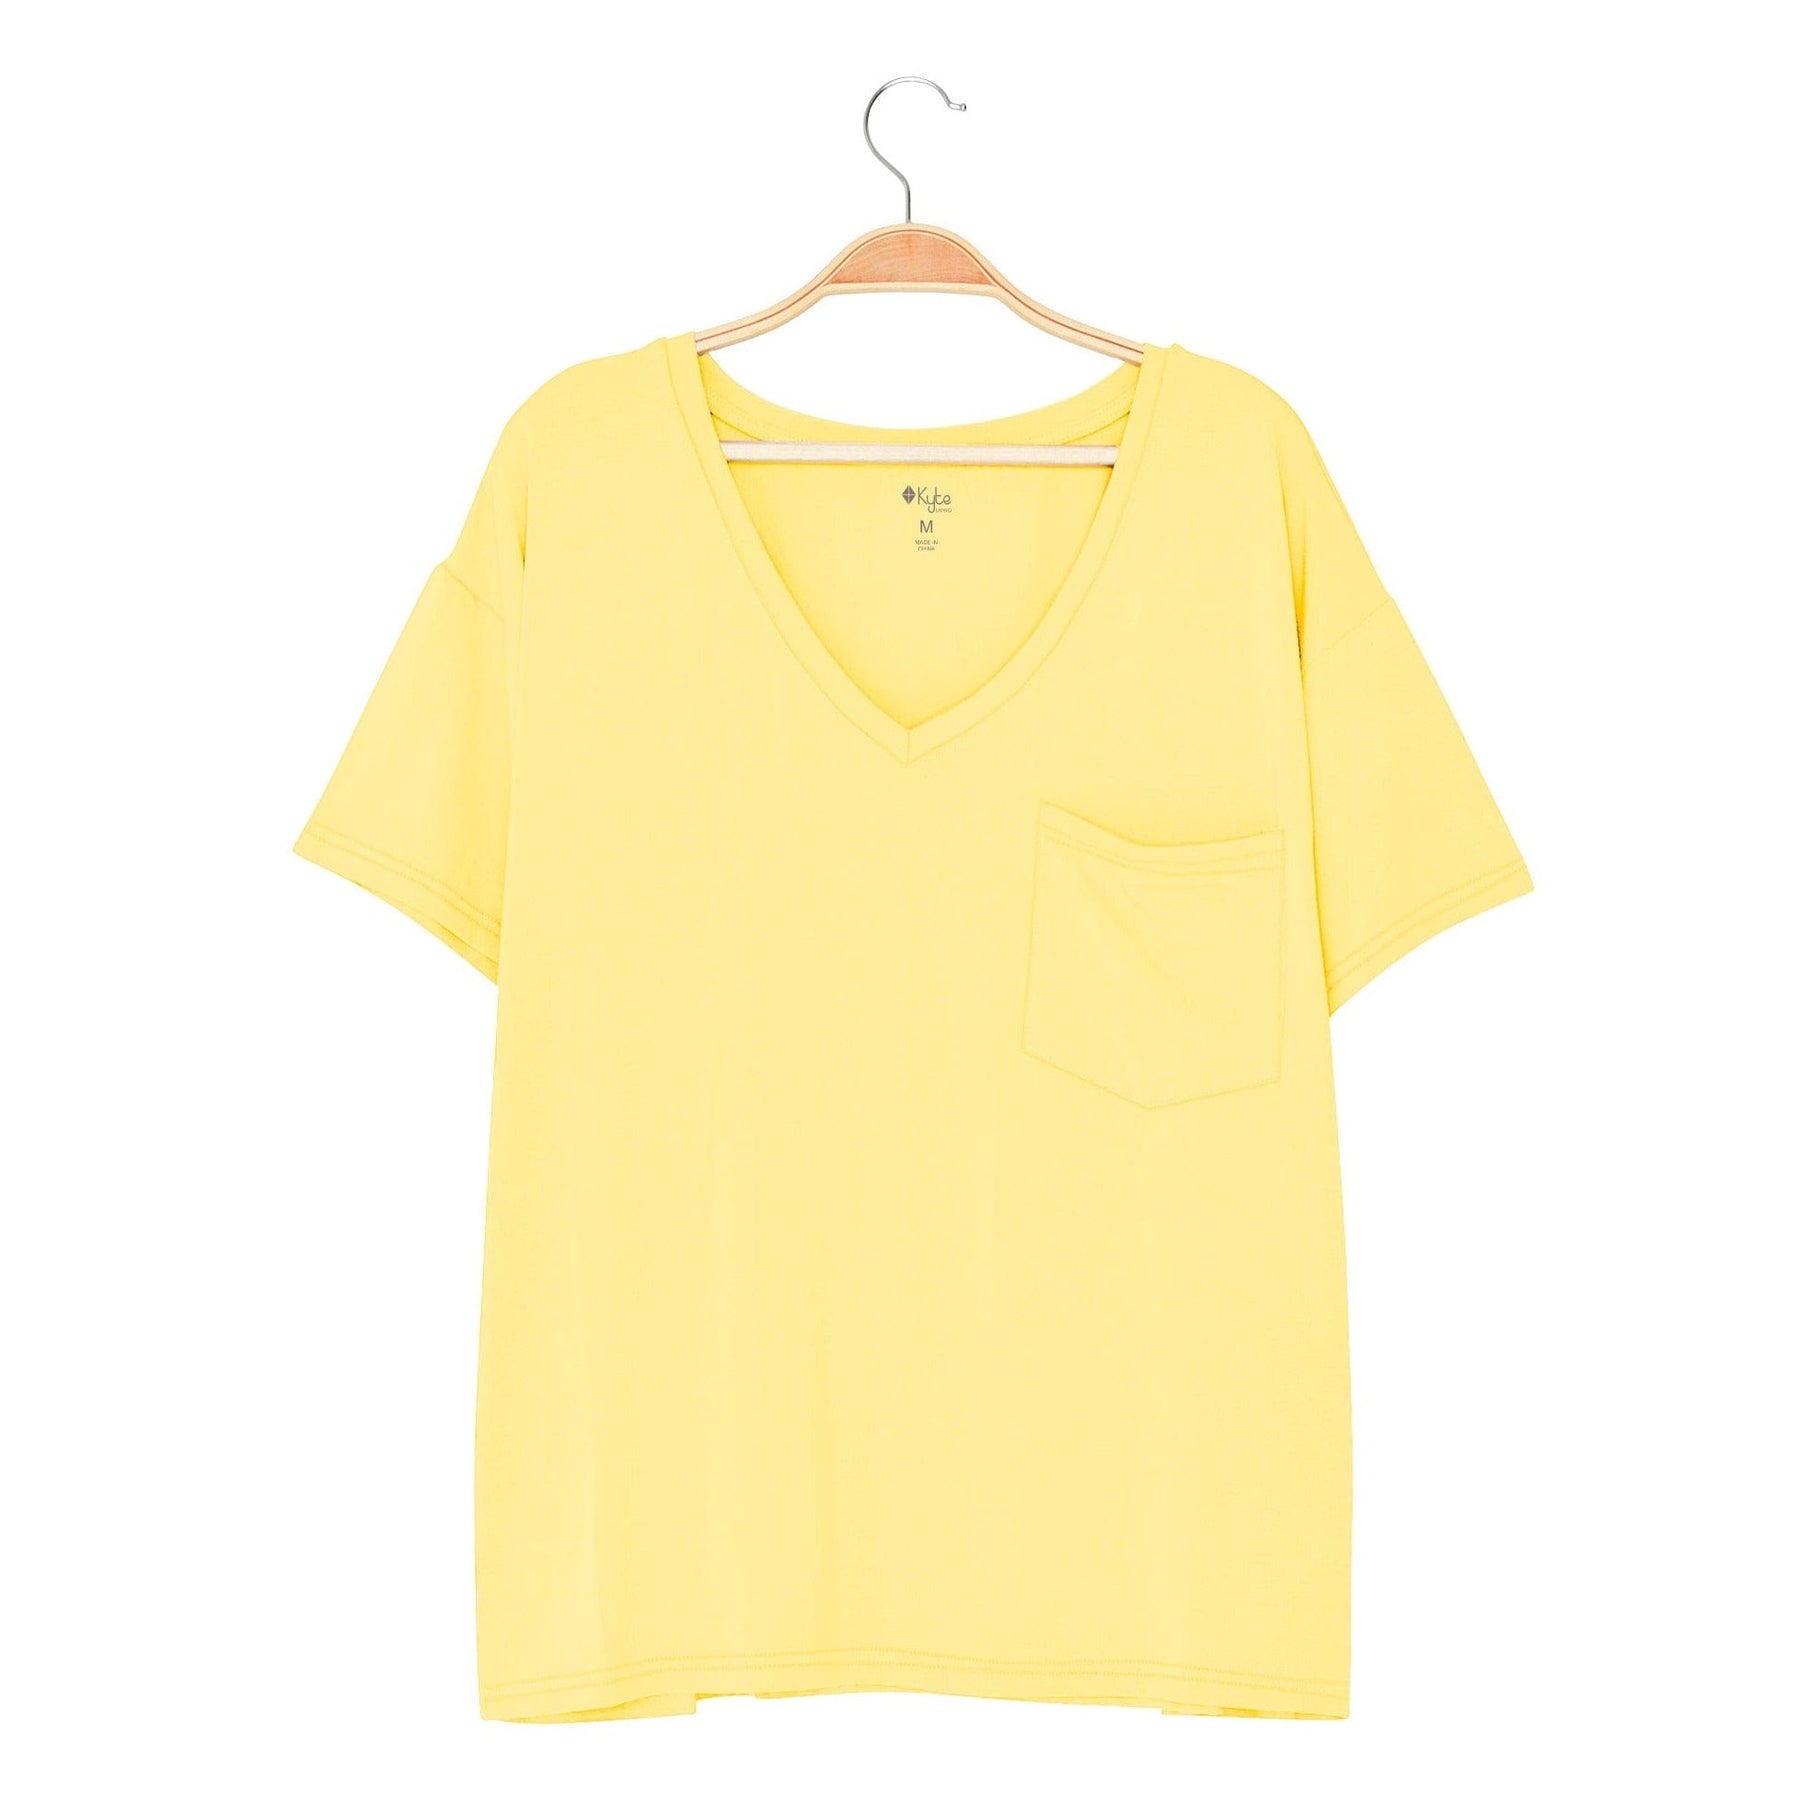 Kyte BABY Women’s Relaxed Fit V-Neck in Daffodil